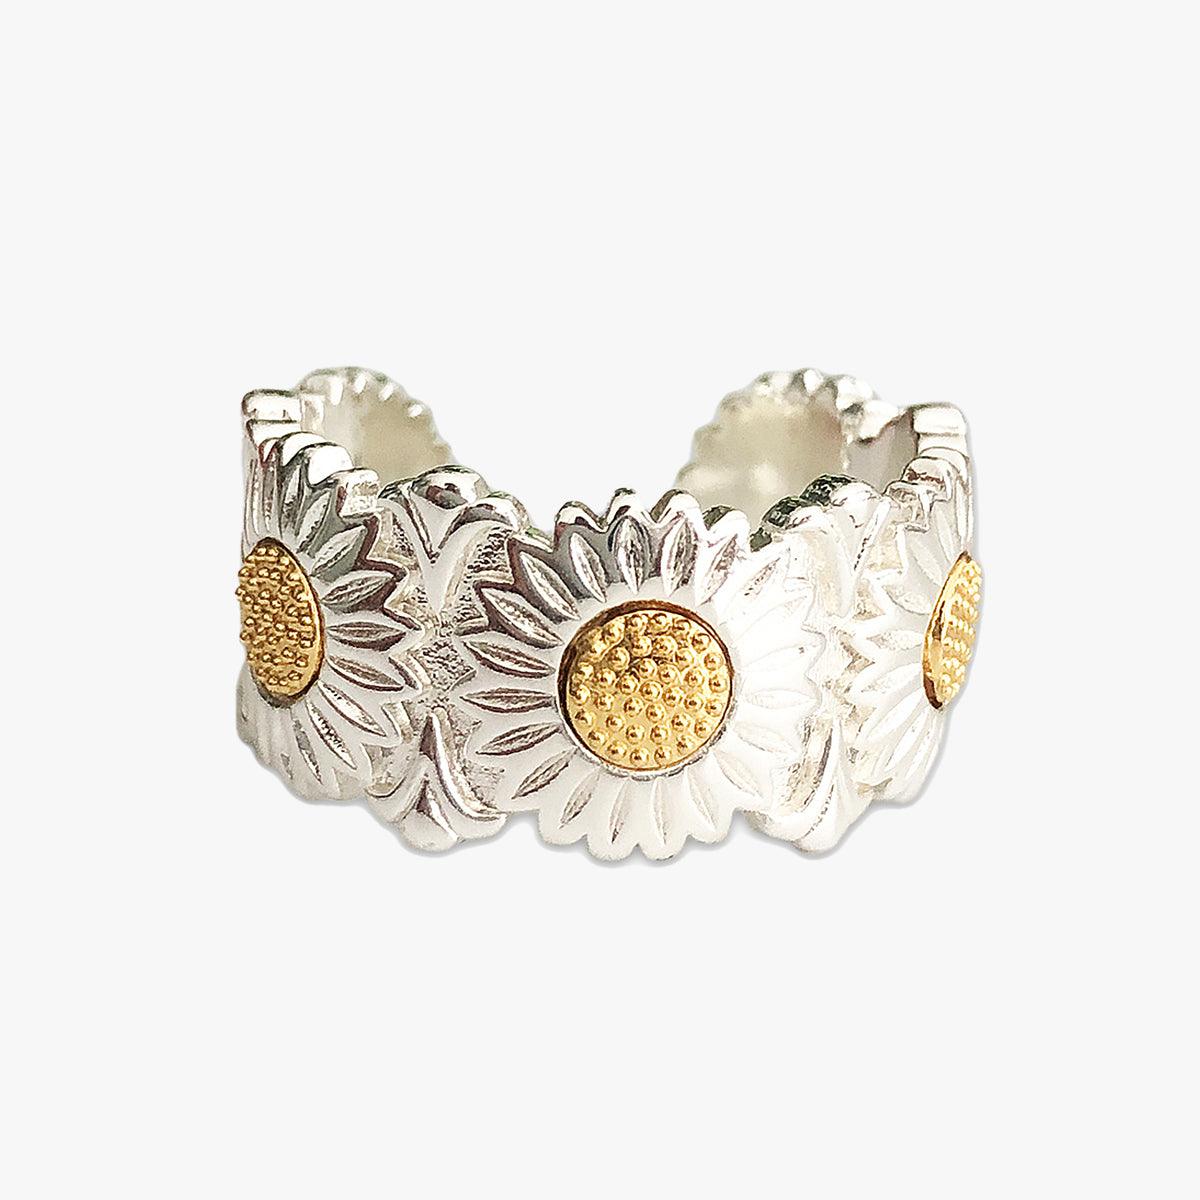 Daisy Hug Silver Ring Soft Girl Aesthetic - Aesthetic Clothes Shop